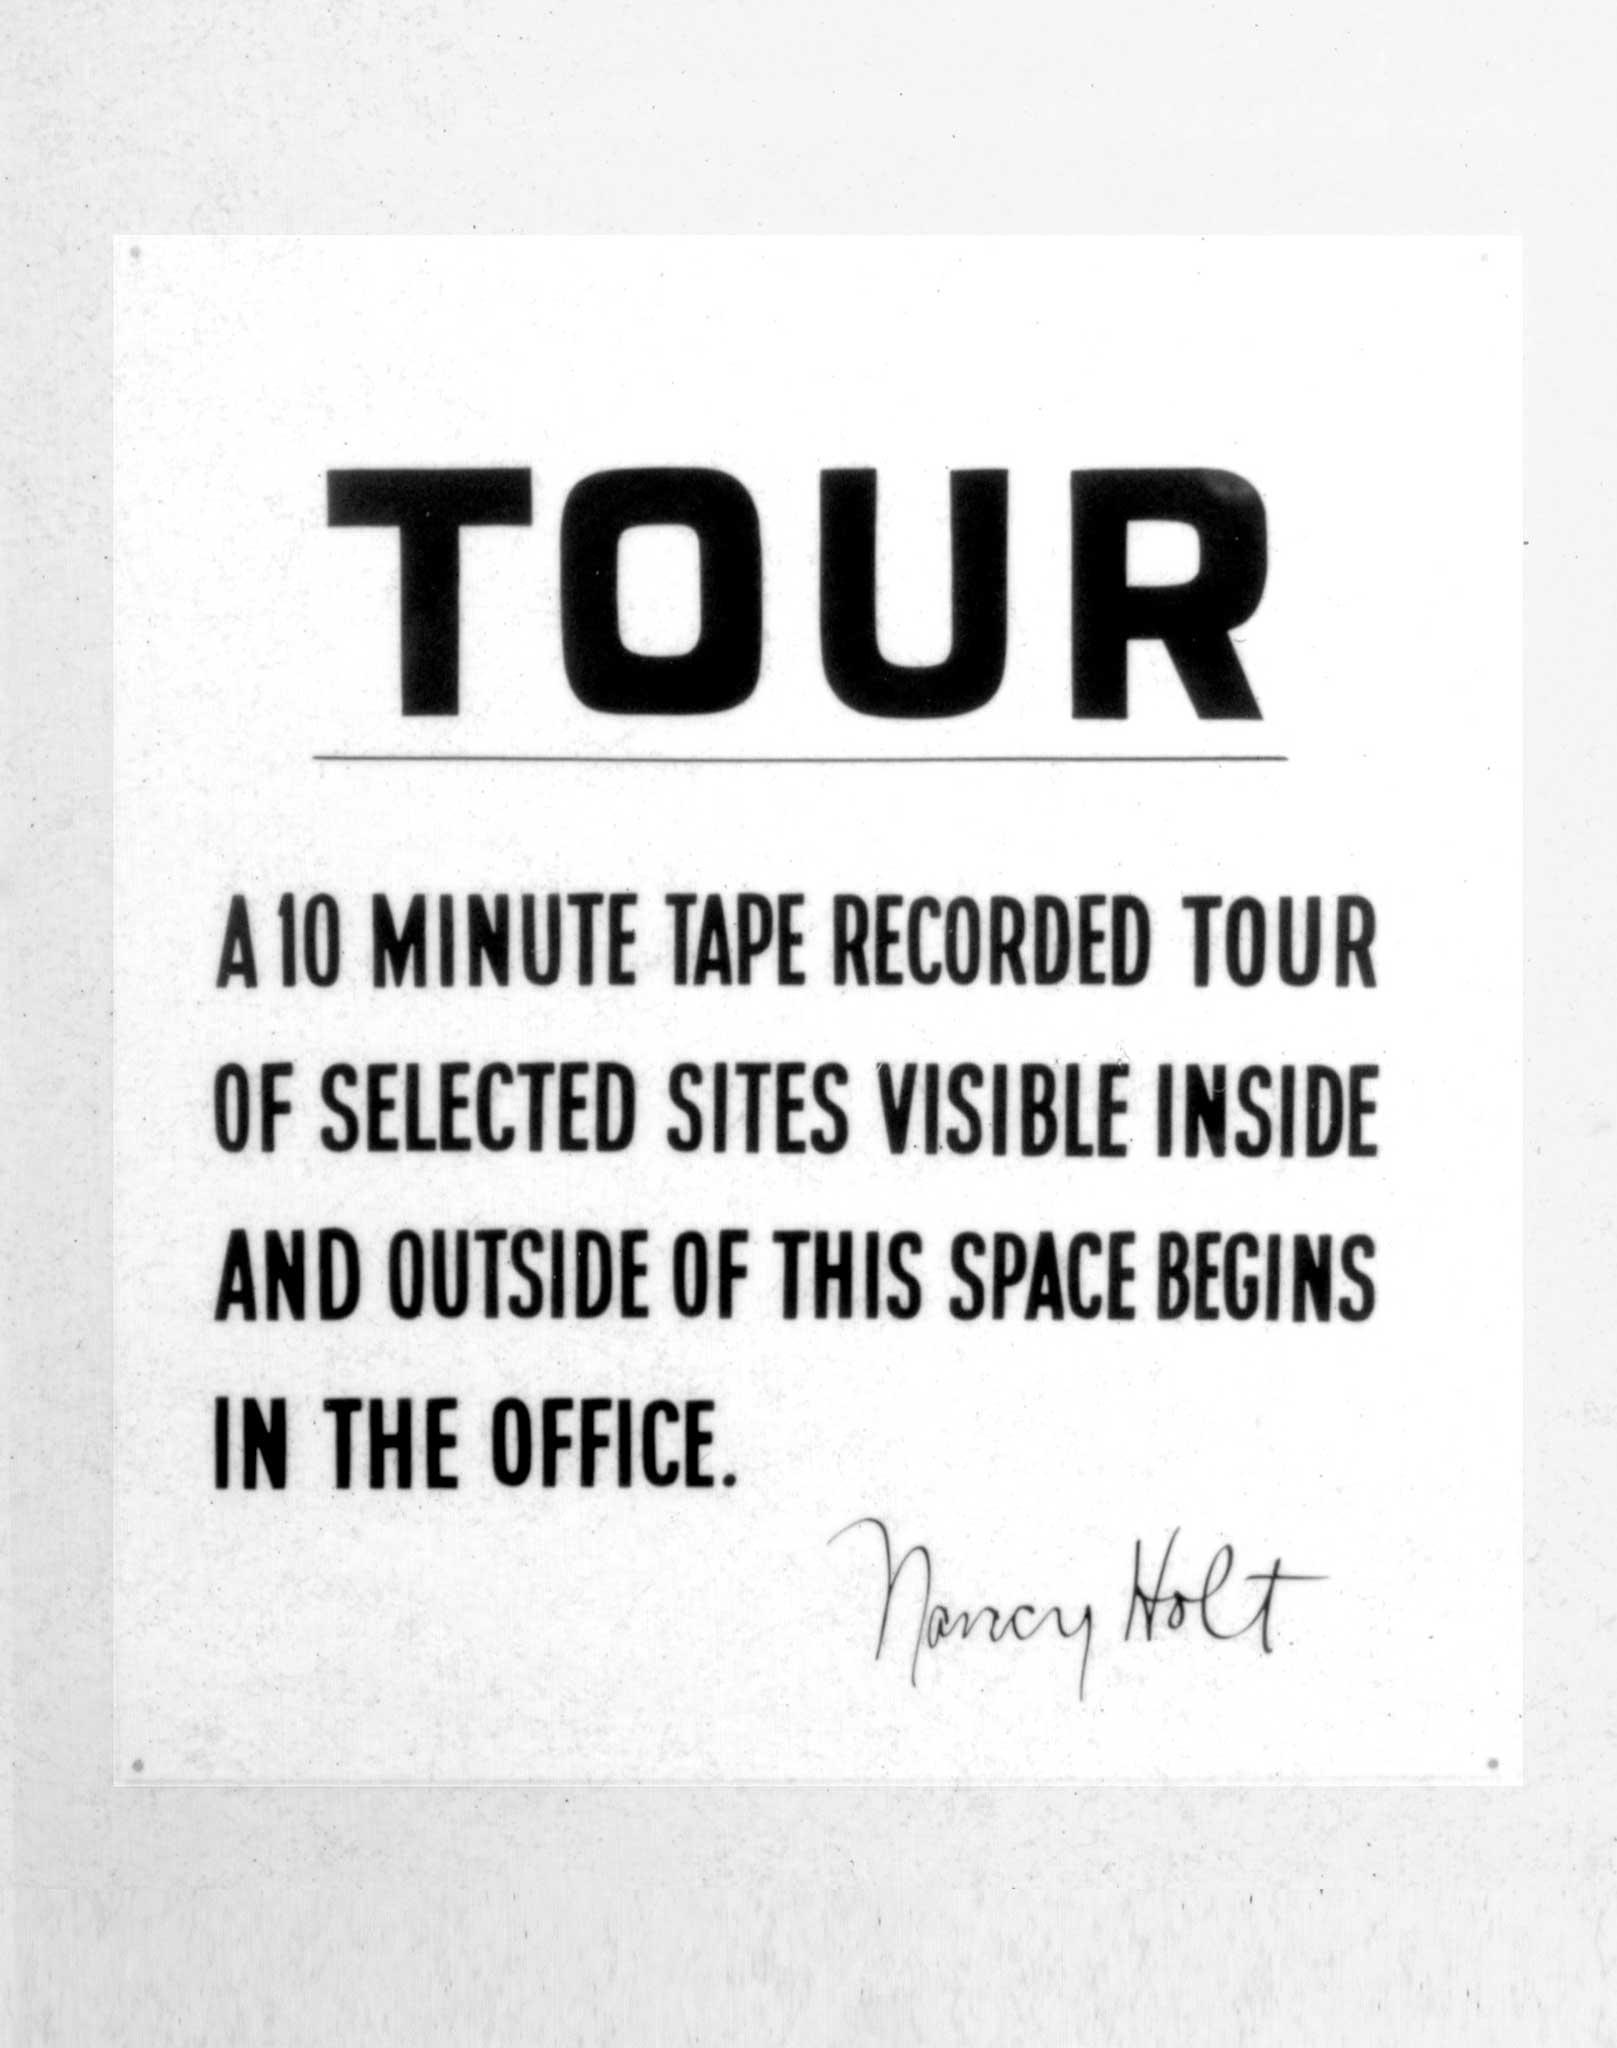 A sign that reads "Tour. a 10 minute tape recorded tour of selected sites visible inside and outside of this space begins in the office"